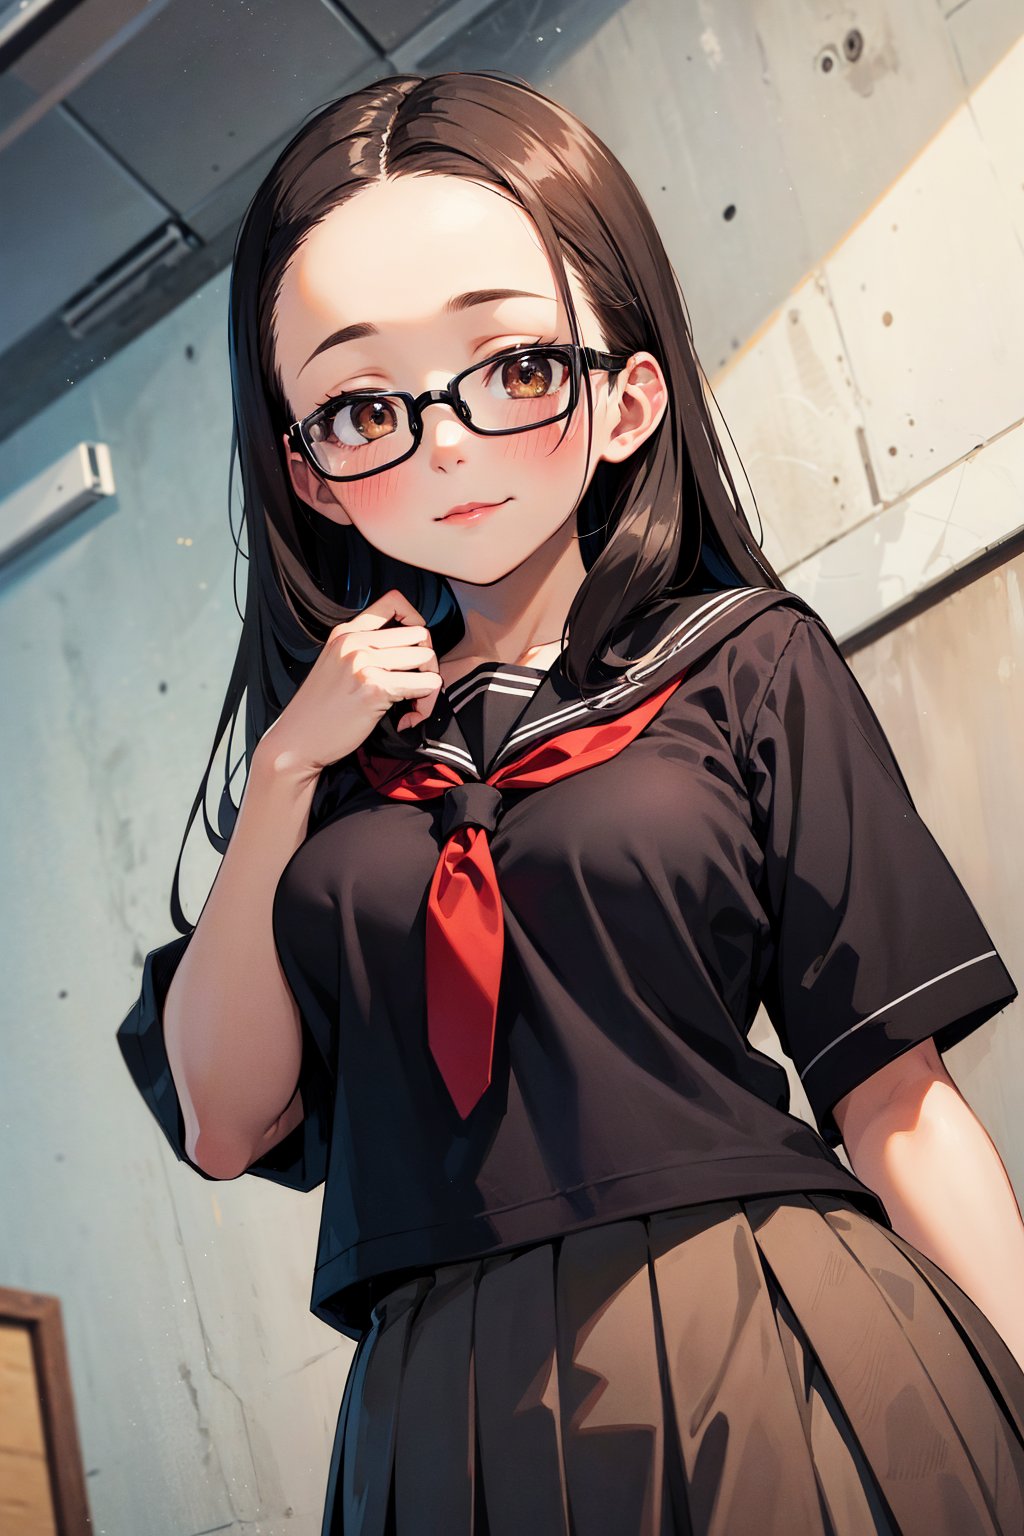 best quality, masterpiece, ultra high res, RAW photo1girl,,solo,, school uniform,serafuku, brown_eyes, black_hair, straight hair, lips,  (forehead:1.3),cute, medium breasts, plump,petite,loli,glasses,,closed mouth, convergent strabismus, bashful, shy, blushing,BREAKmorning,Cheerfully greeting everyone, Simple background,Model shooting style